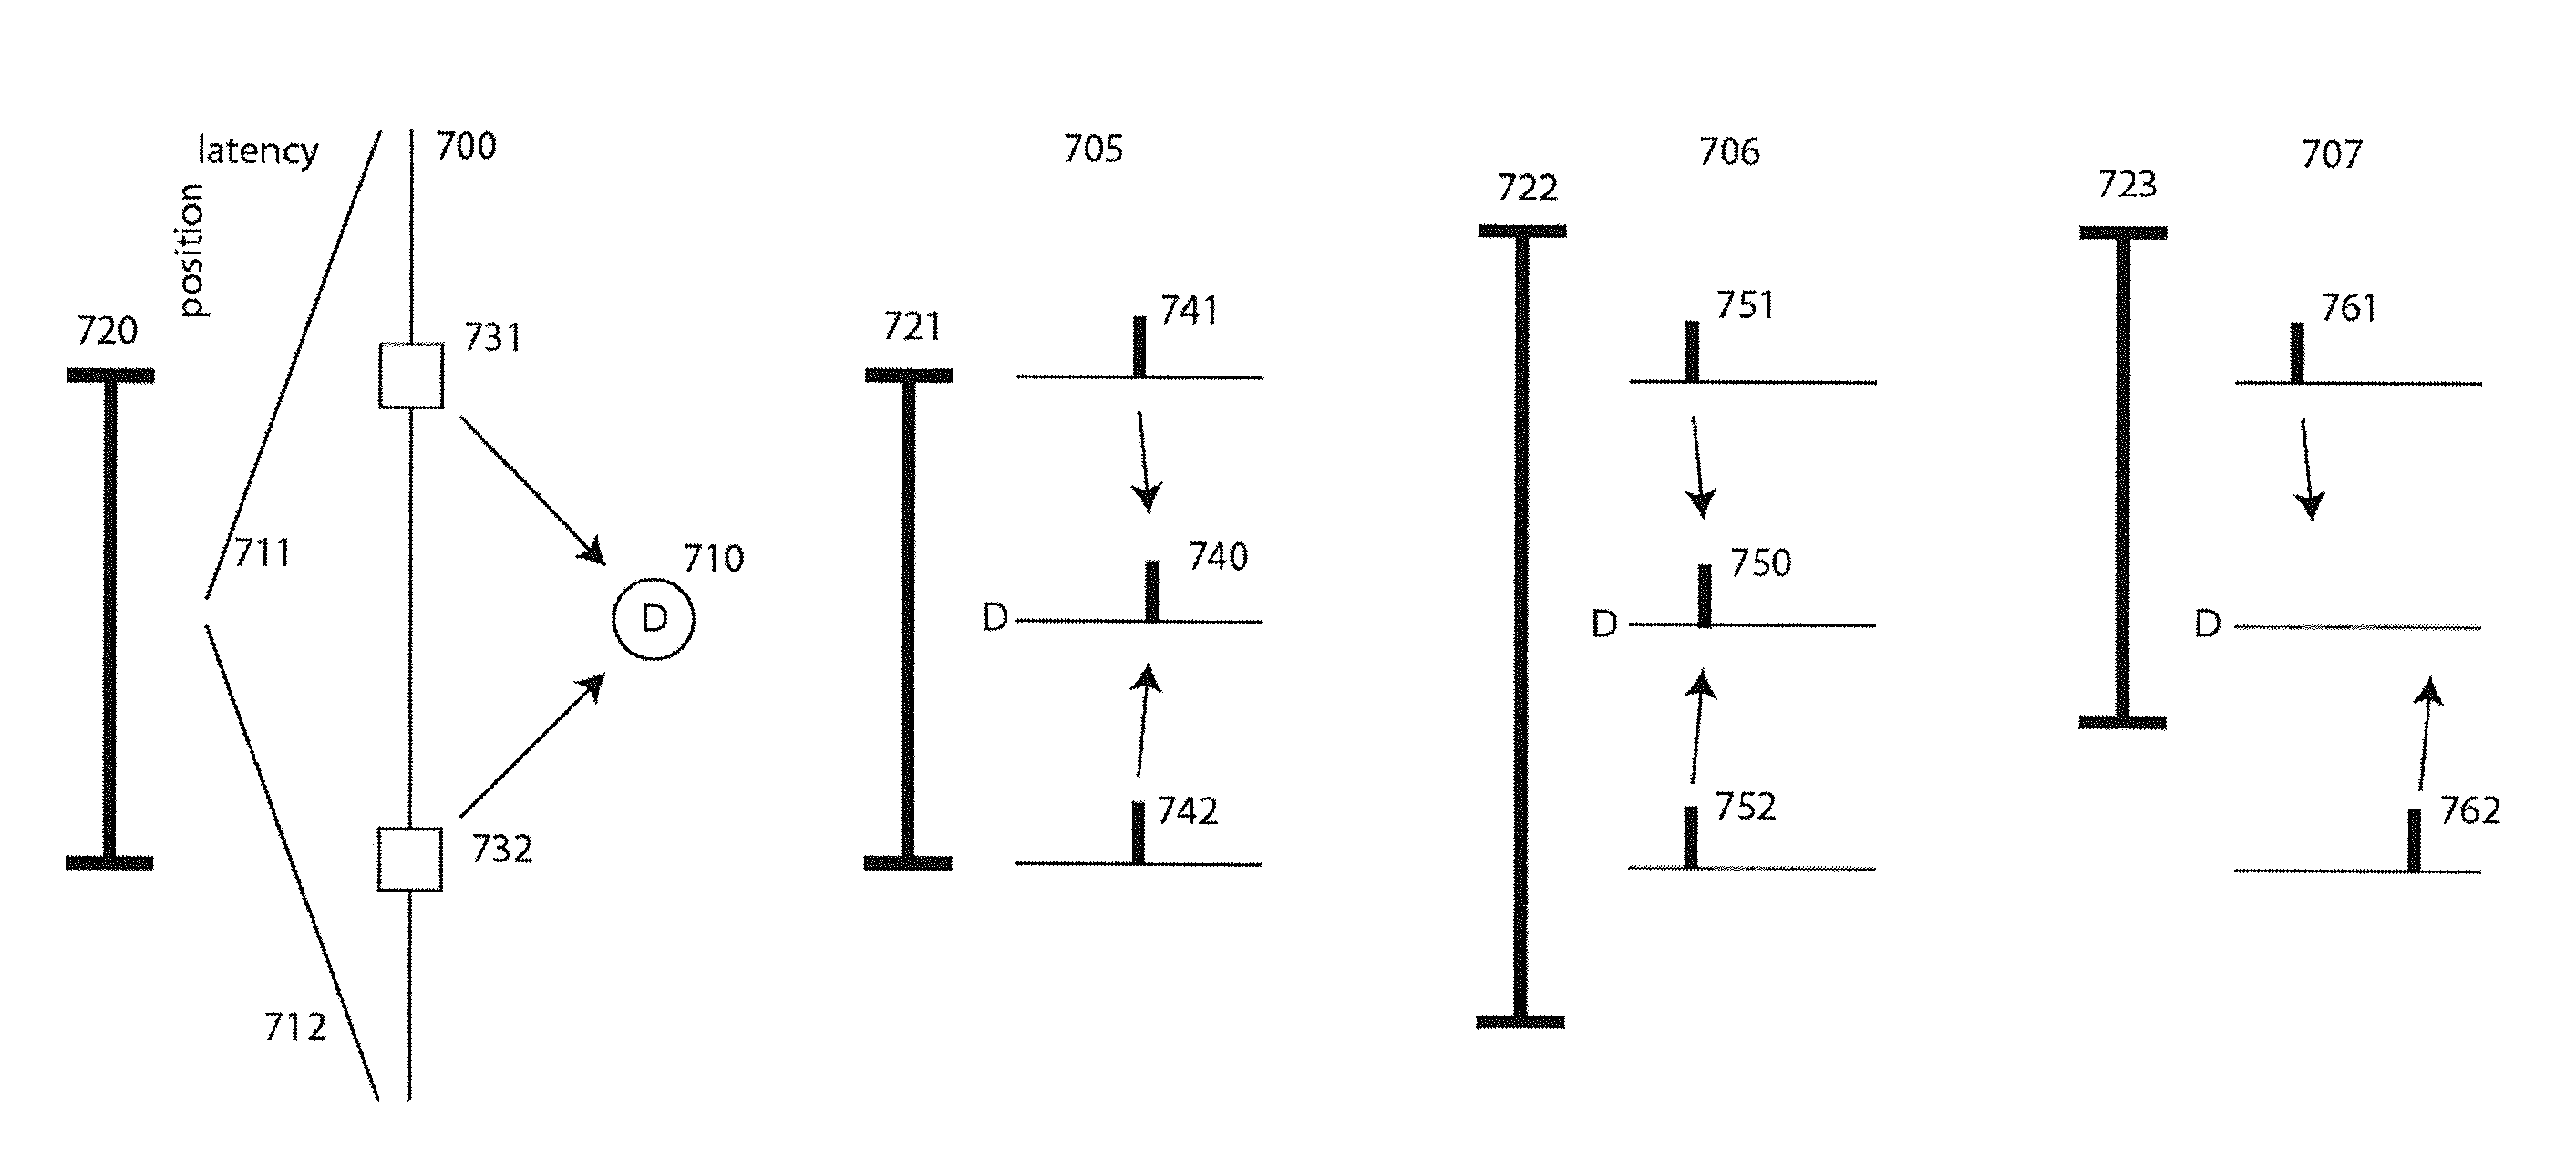 Apparatus and methods for pulse-code invariant object recognition